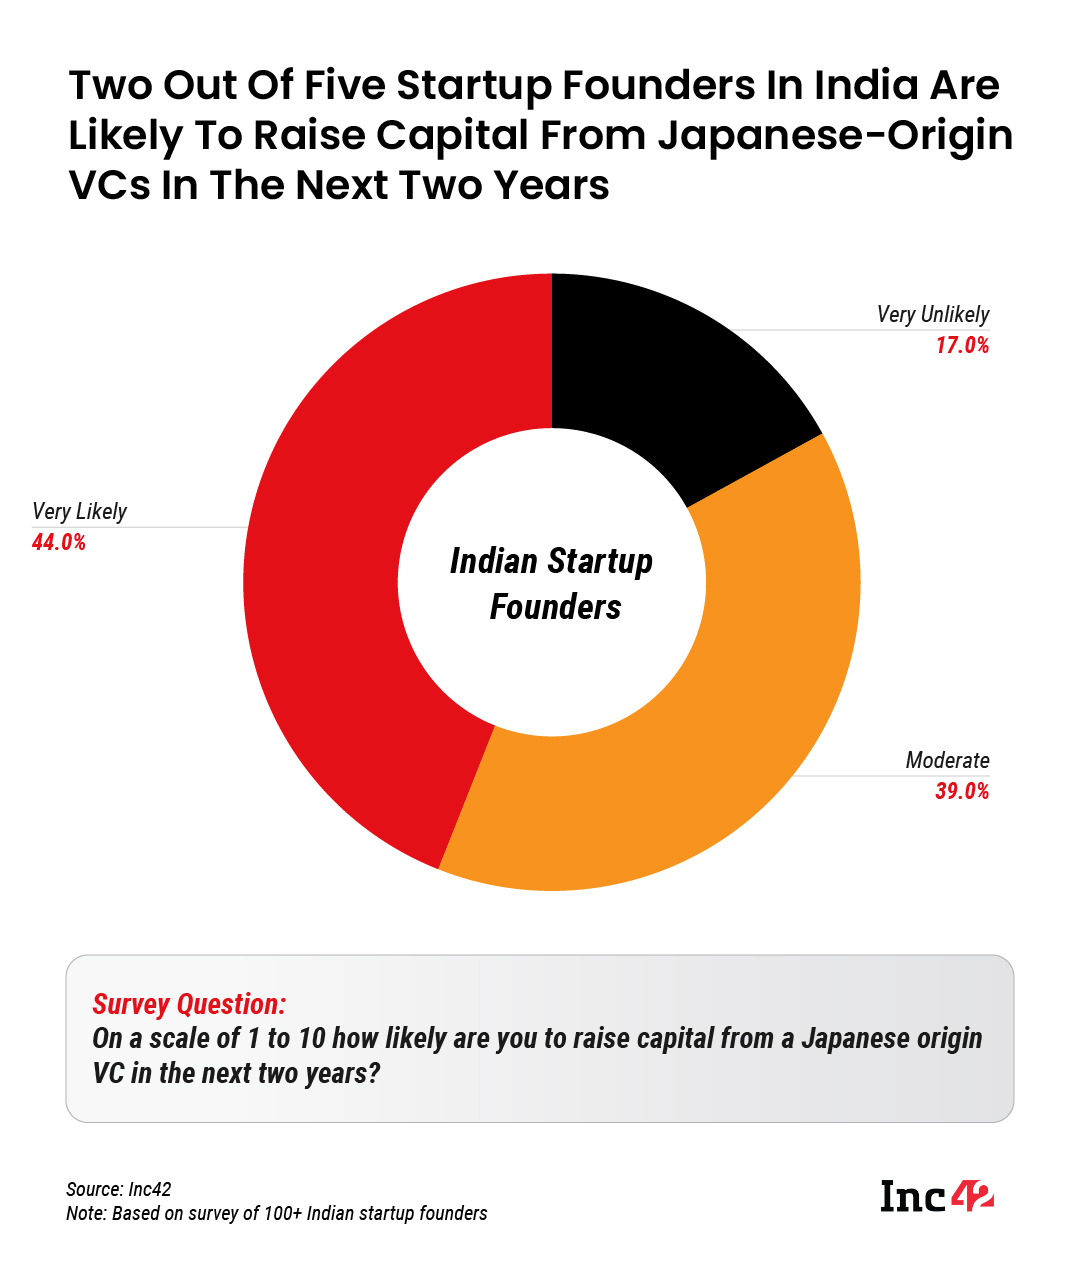 Two Out Of Five Startup Founders In India Are Likely To Raise Capital From Japanese-Origin VCs In The Next Two Years 